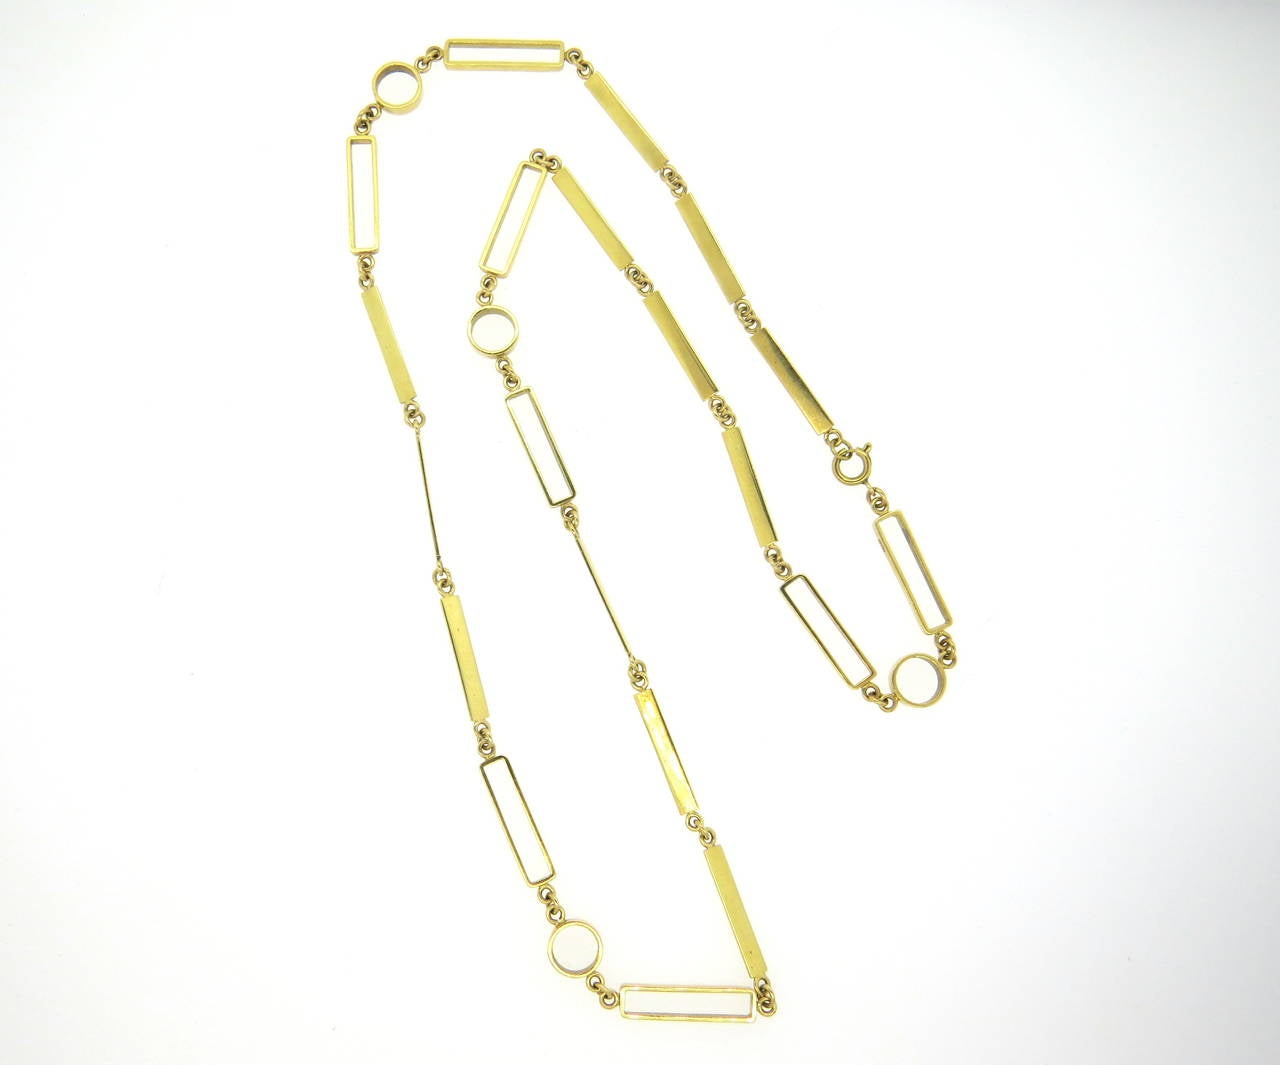 1970s 18k yellow gold necklace, designed with rectangular and circle links. Necklace is 30